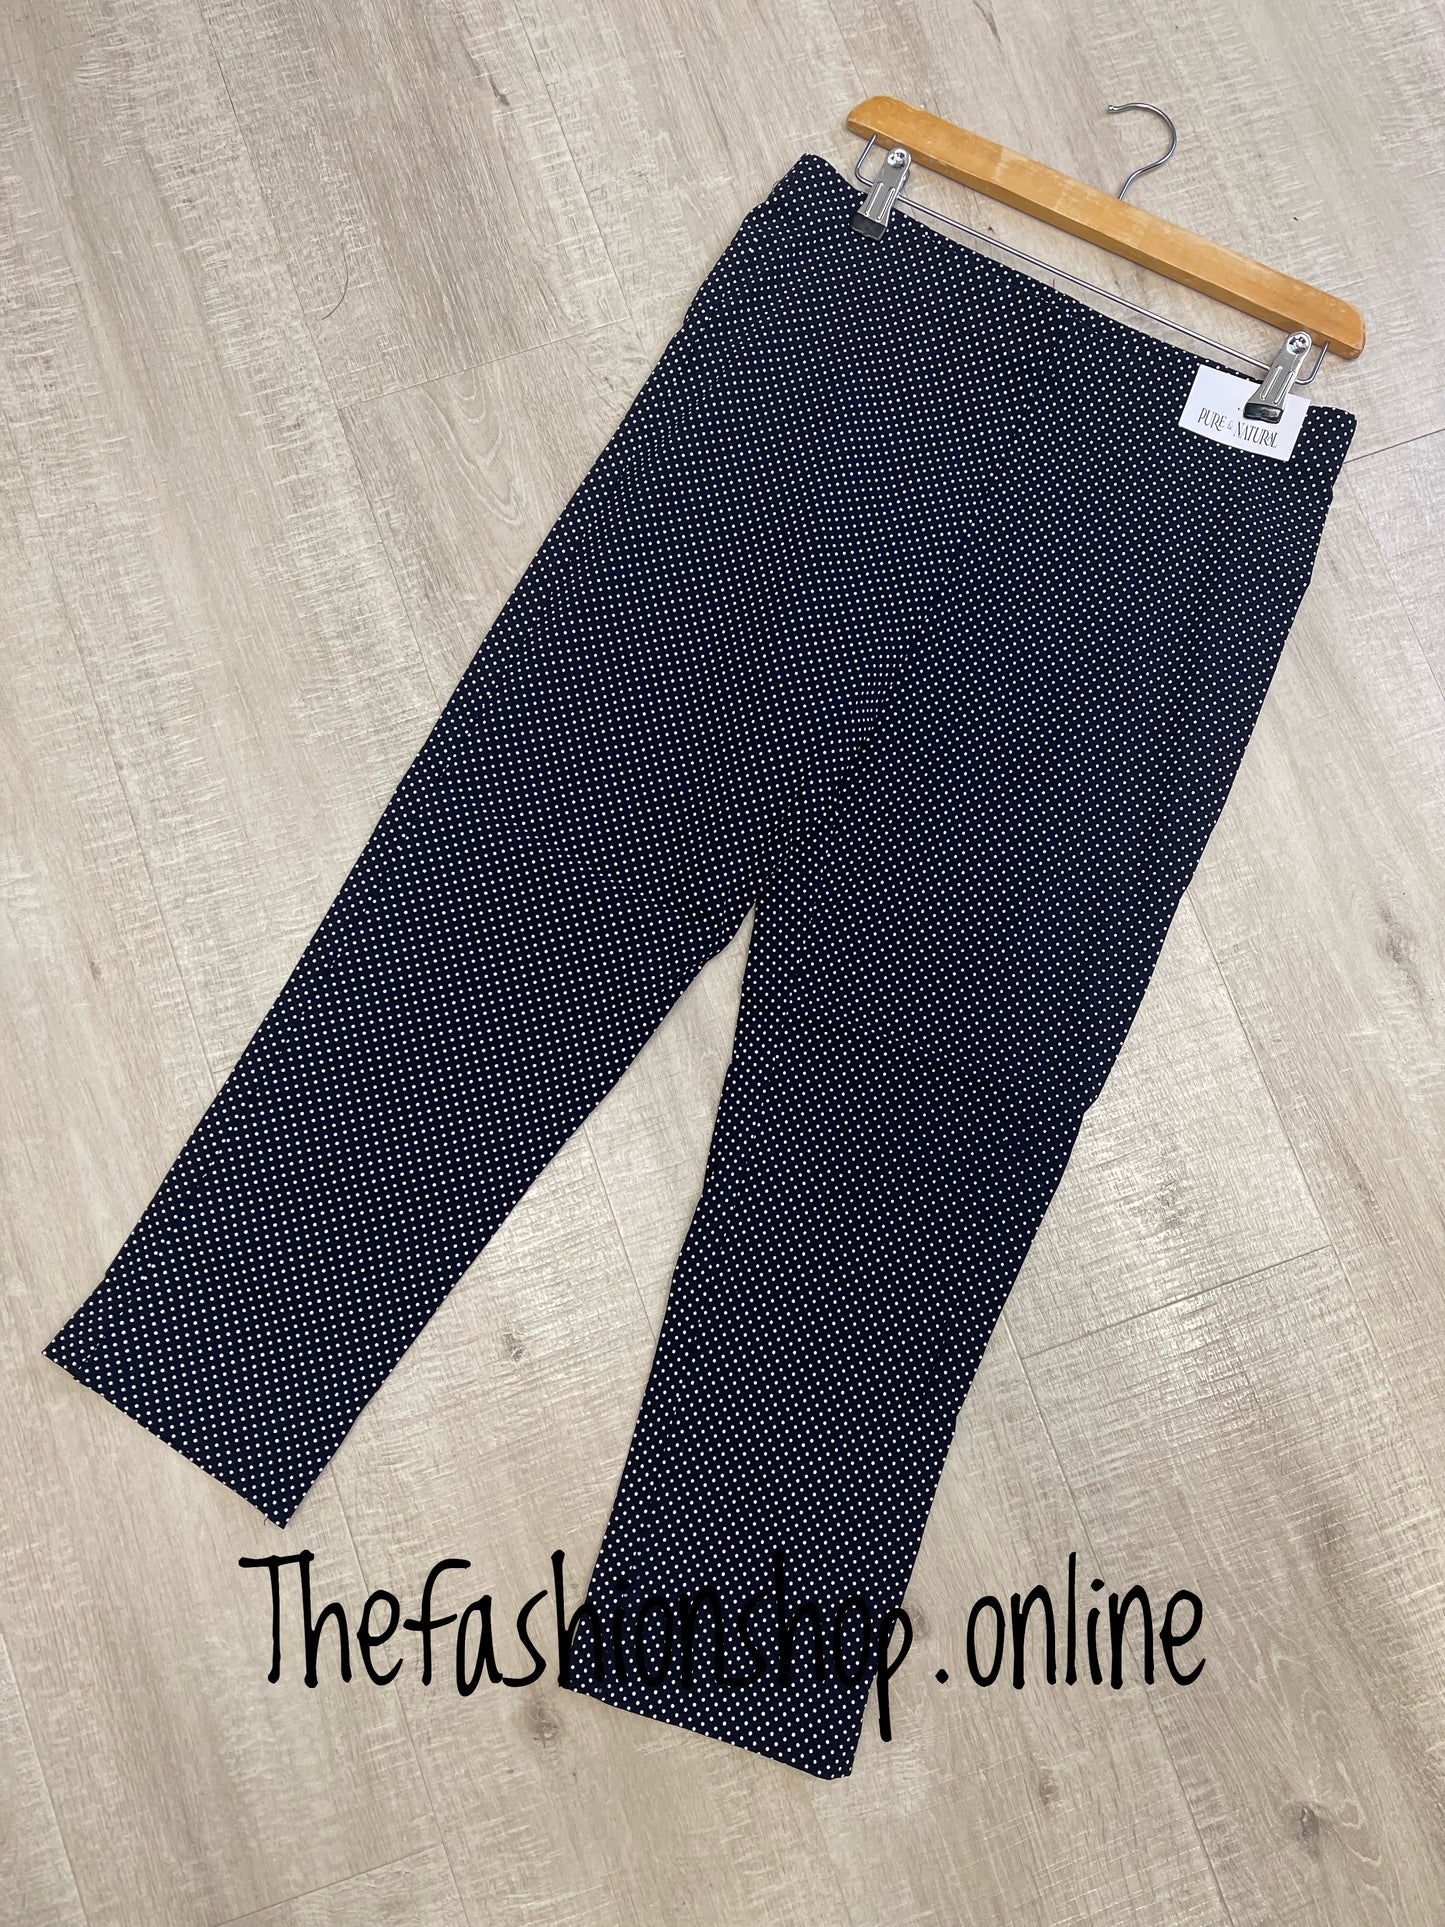 Navy polka dot cropped stretchy sized trousers sizes 10-22